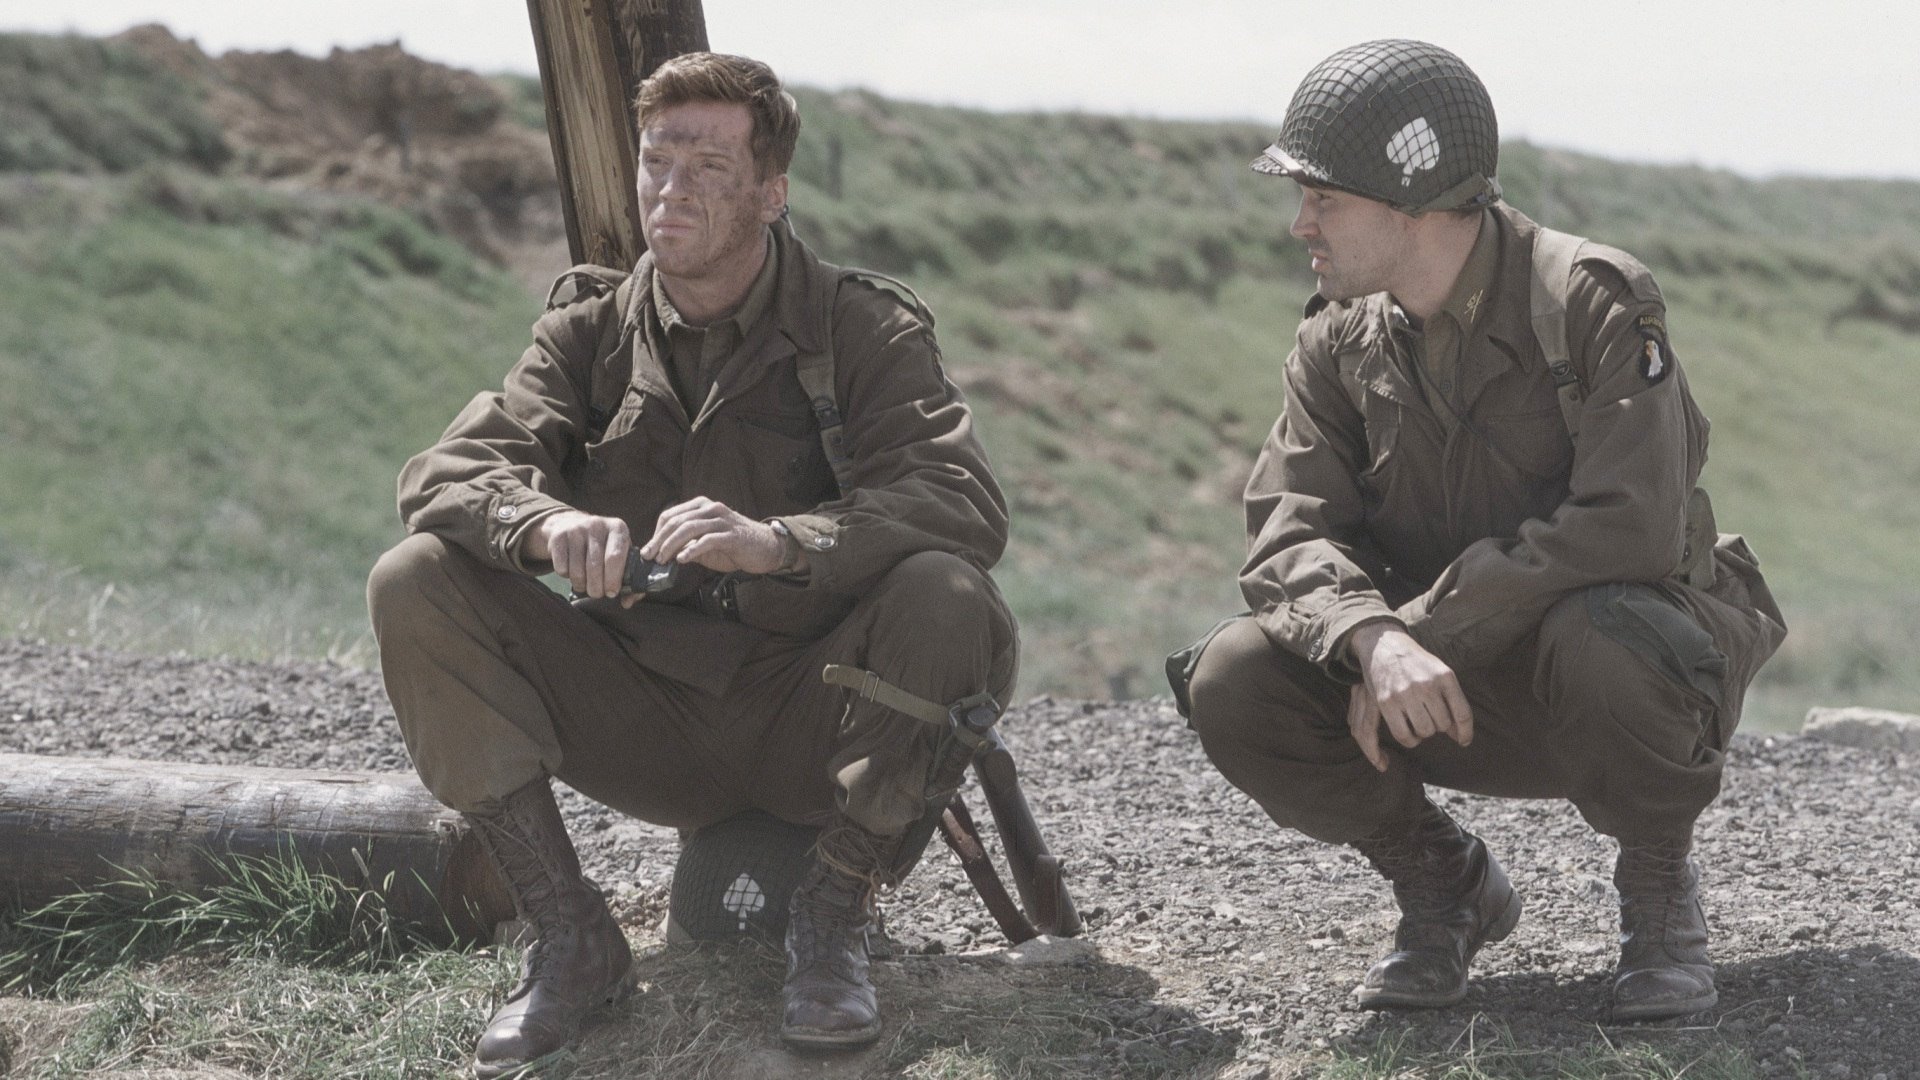 Band Of Brothers Season 1 Episode 5 Online Stream Full Episodes